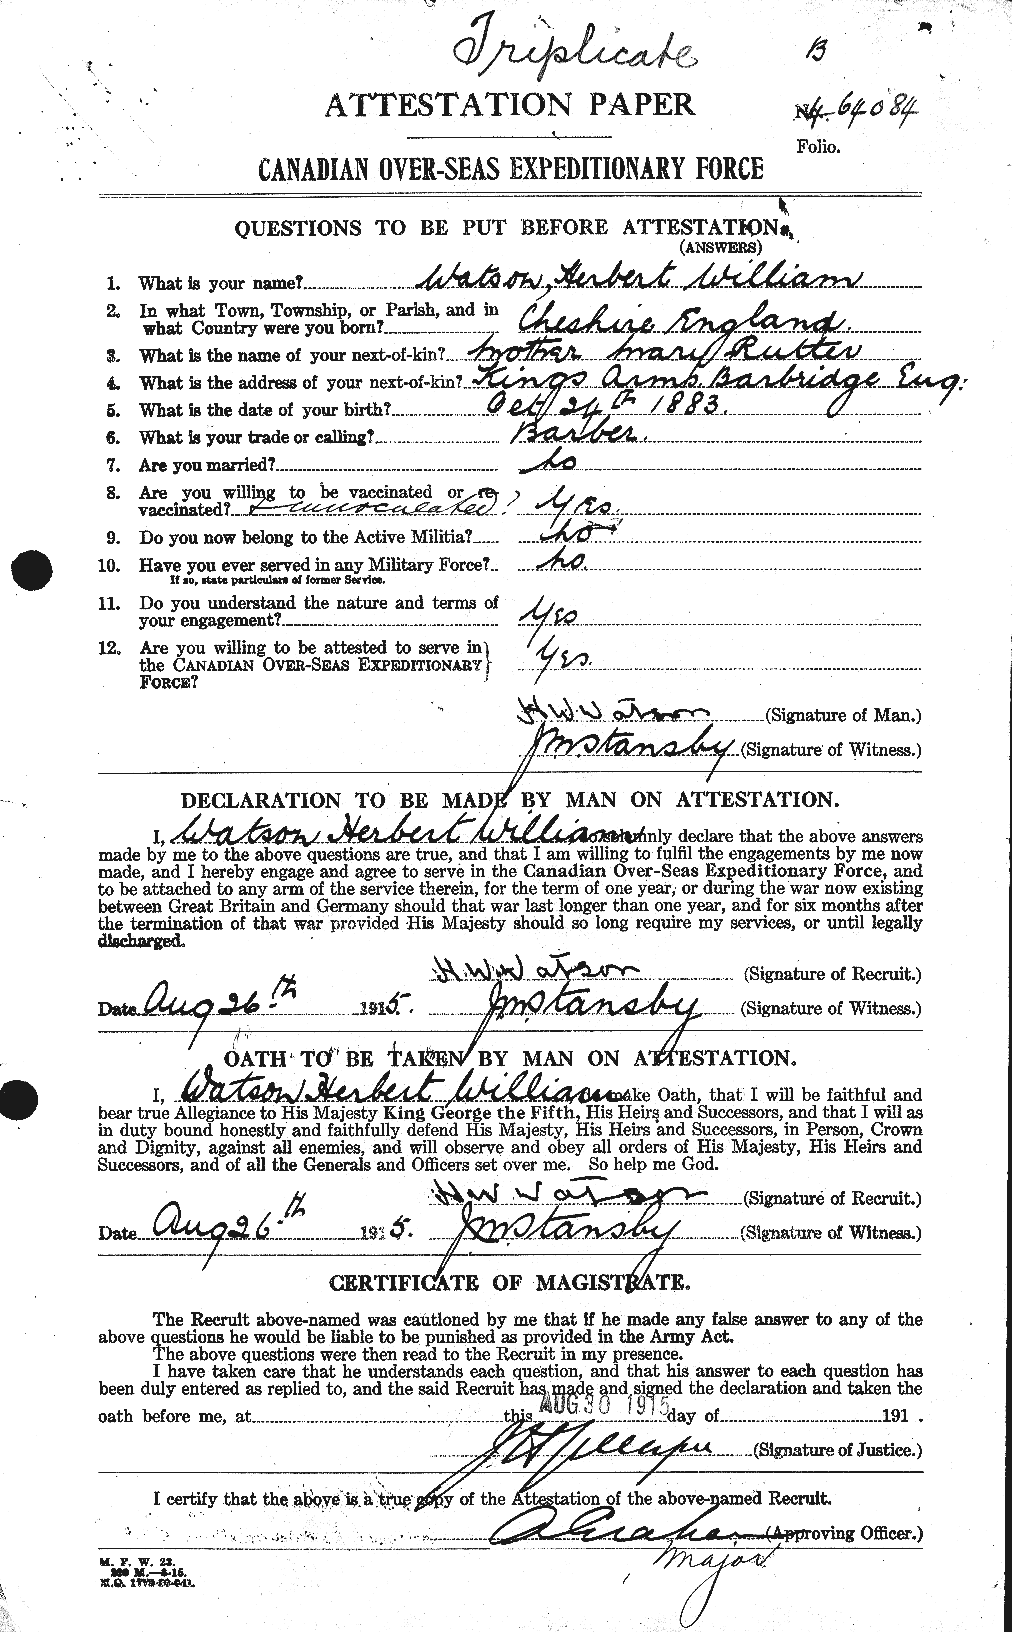 Personnel Records of the First World War - CEF 658858a